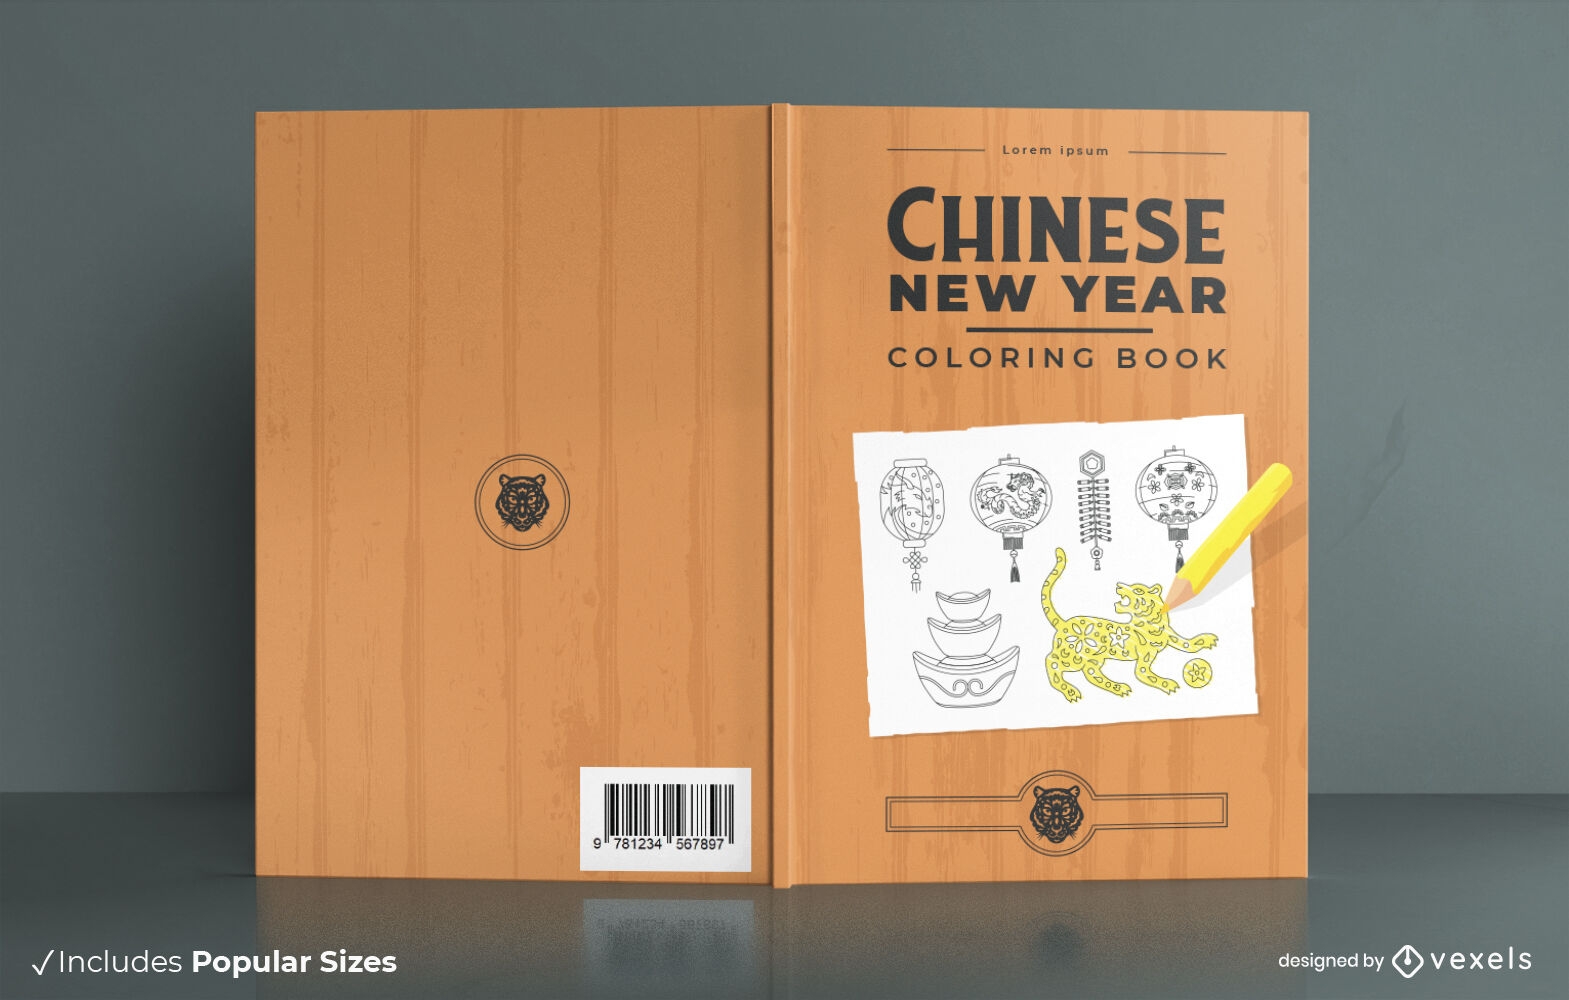 Chiese new year coloring book cover design